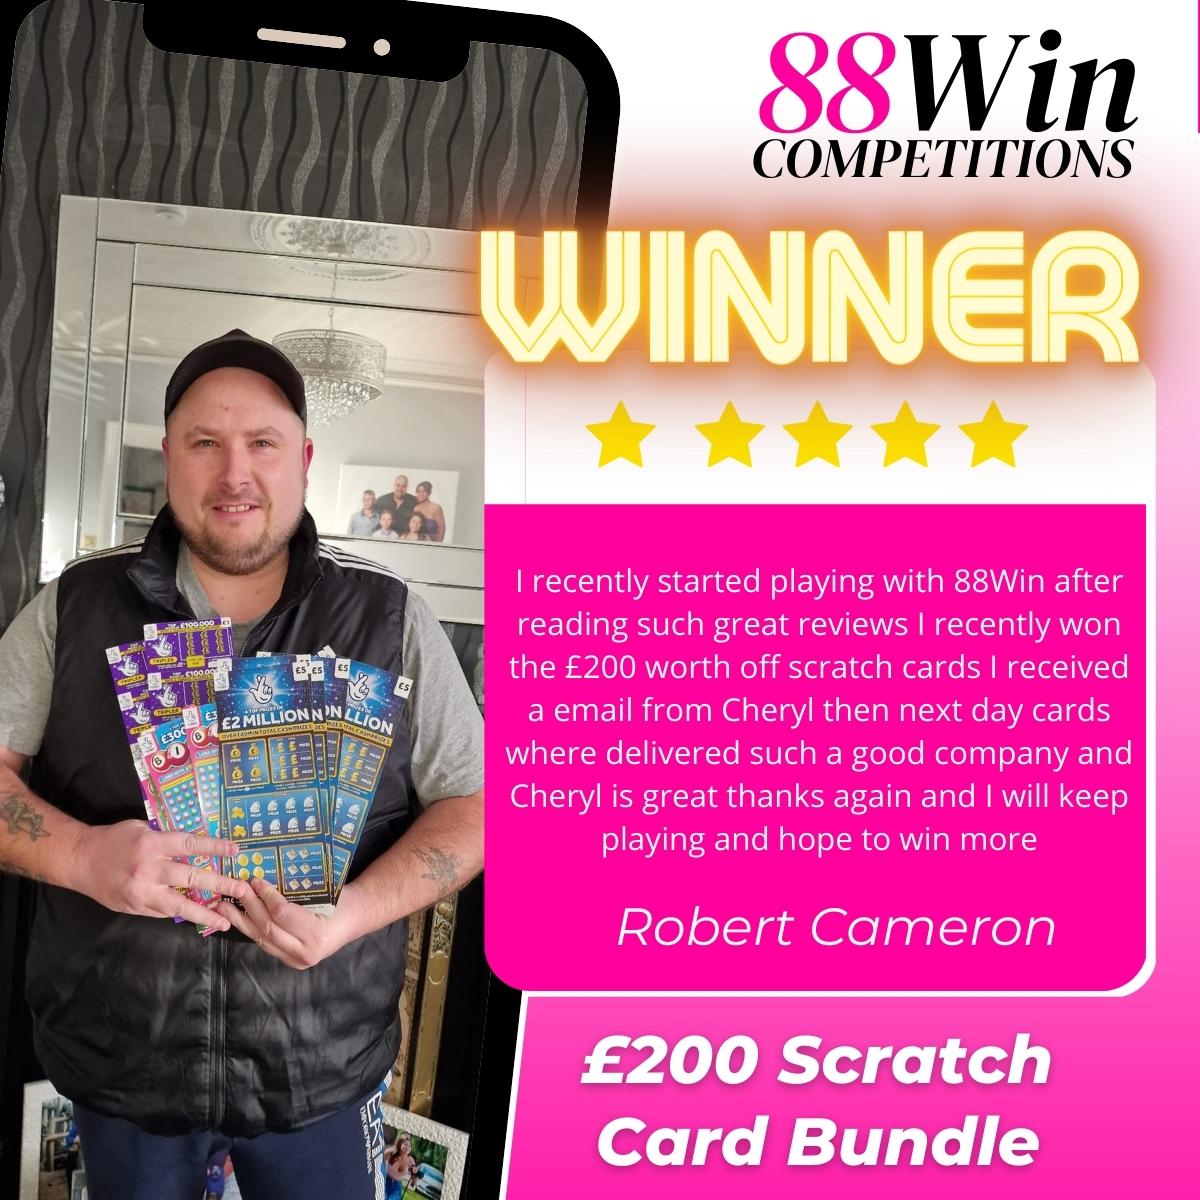 88Win Competitions £200 Scratch Card Bundle Winner Photo